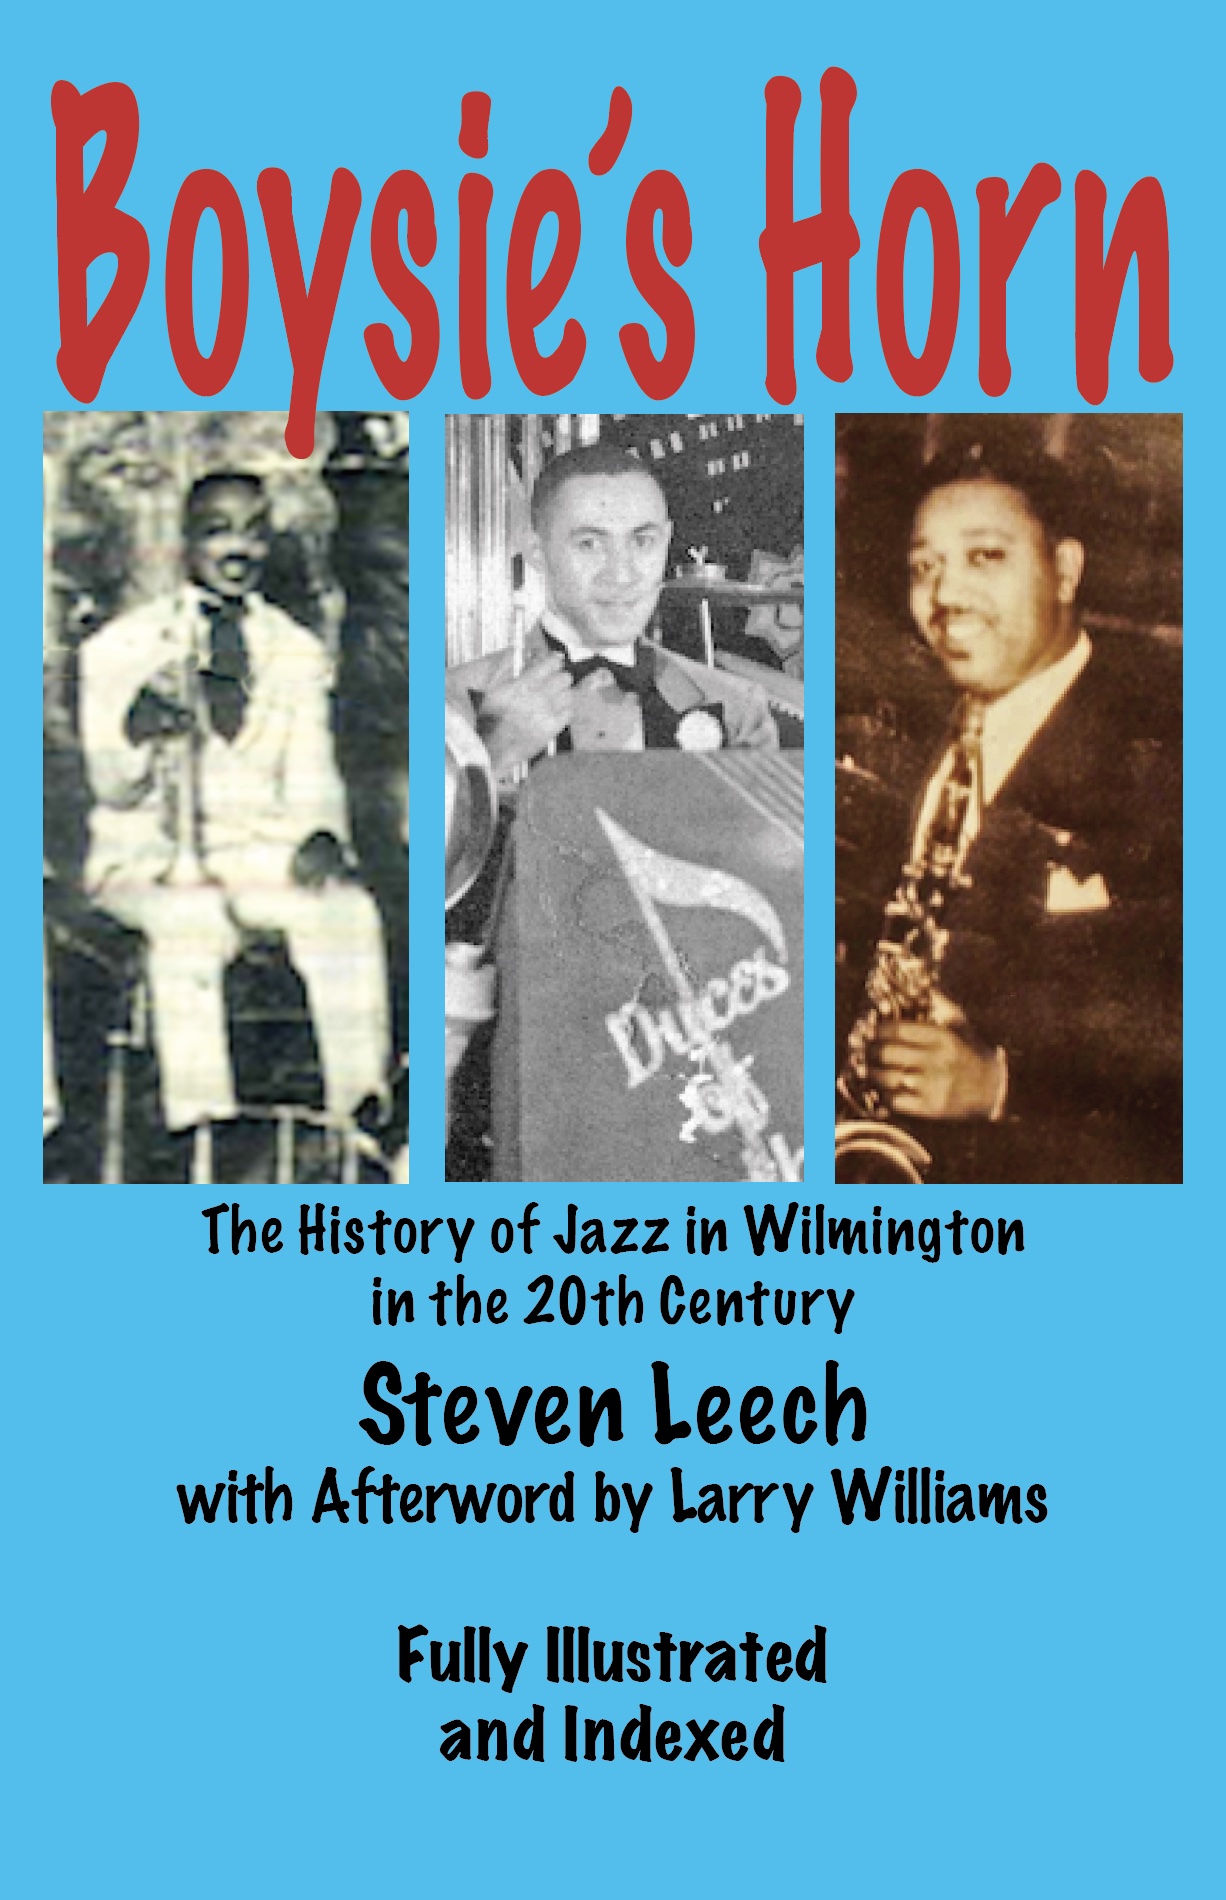 Boysie’s Horn, The History of Jazz in Wilmington in the 20th Century By Steven Leech with Afterword by Larry Williams